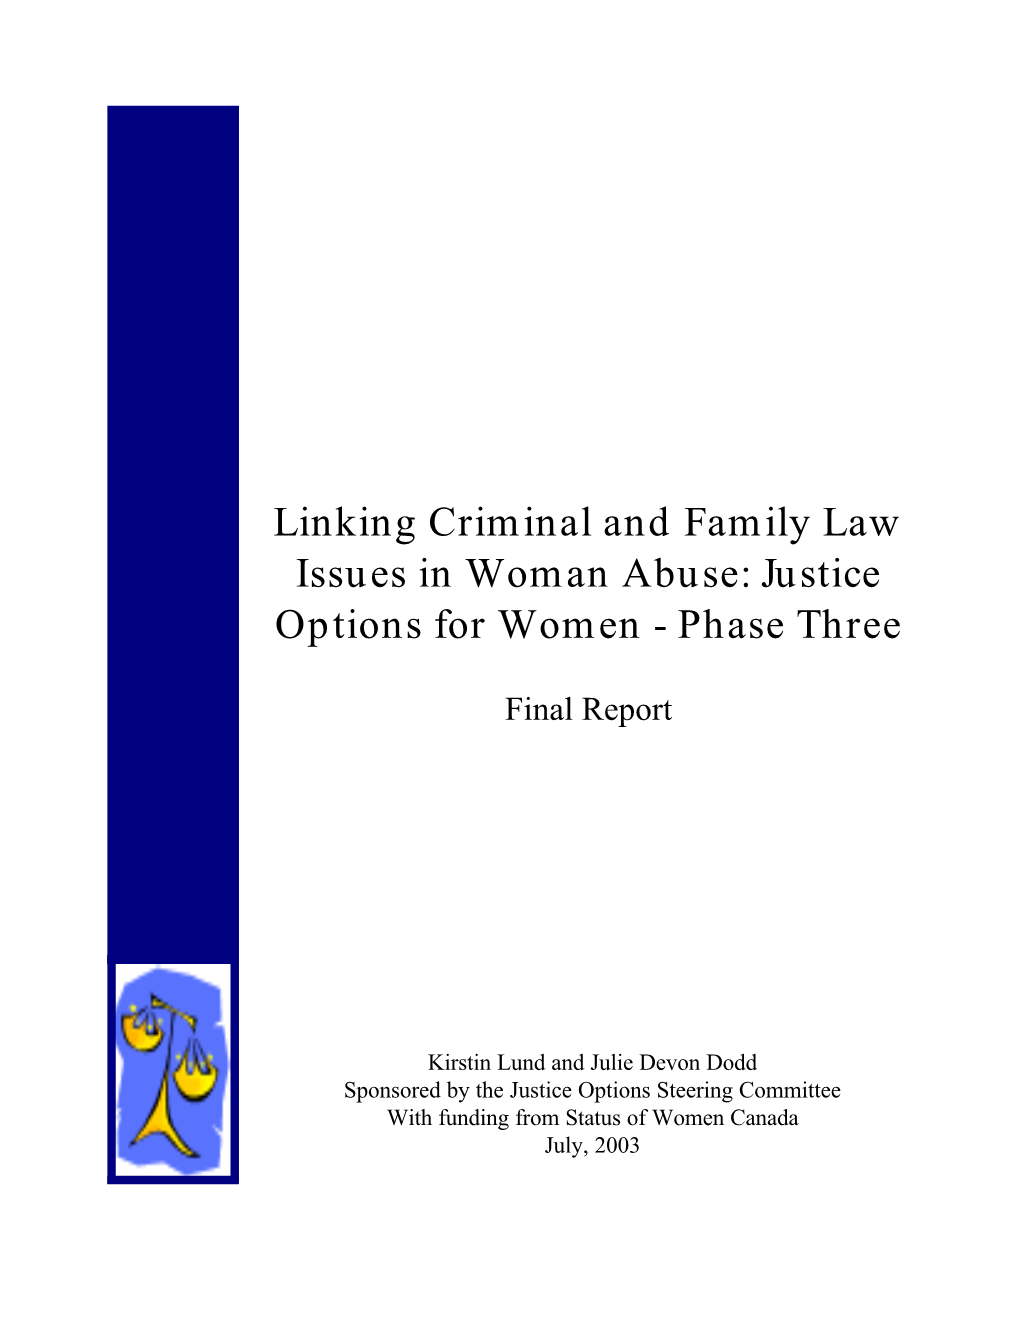 Linking Criminal and Family Law Issues in Woman Abuse: Justice Options for Women - Phase Three